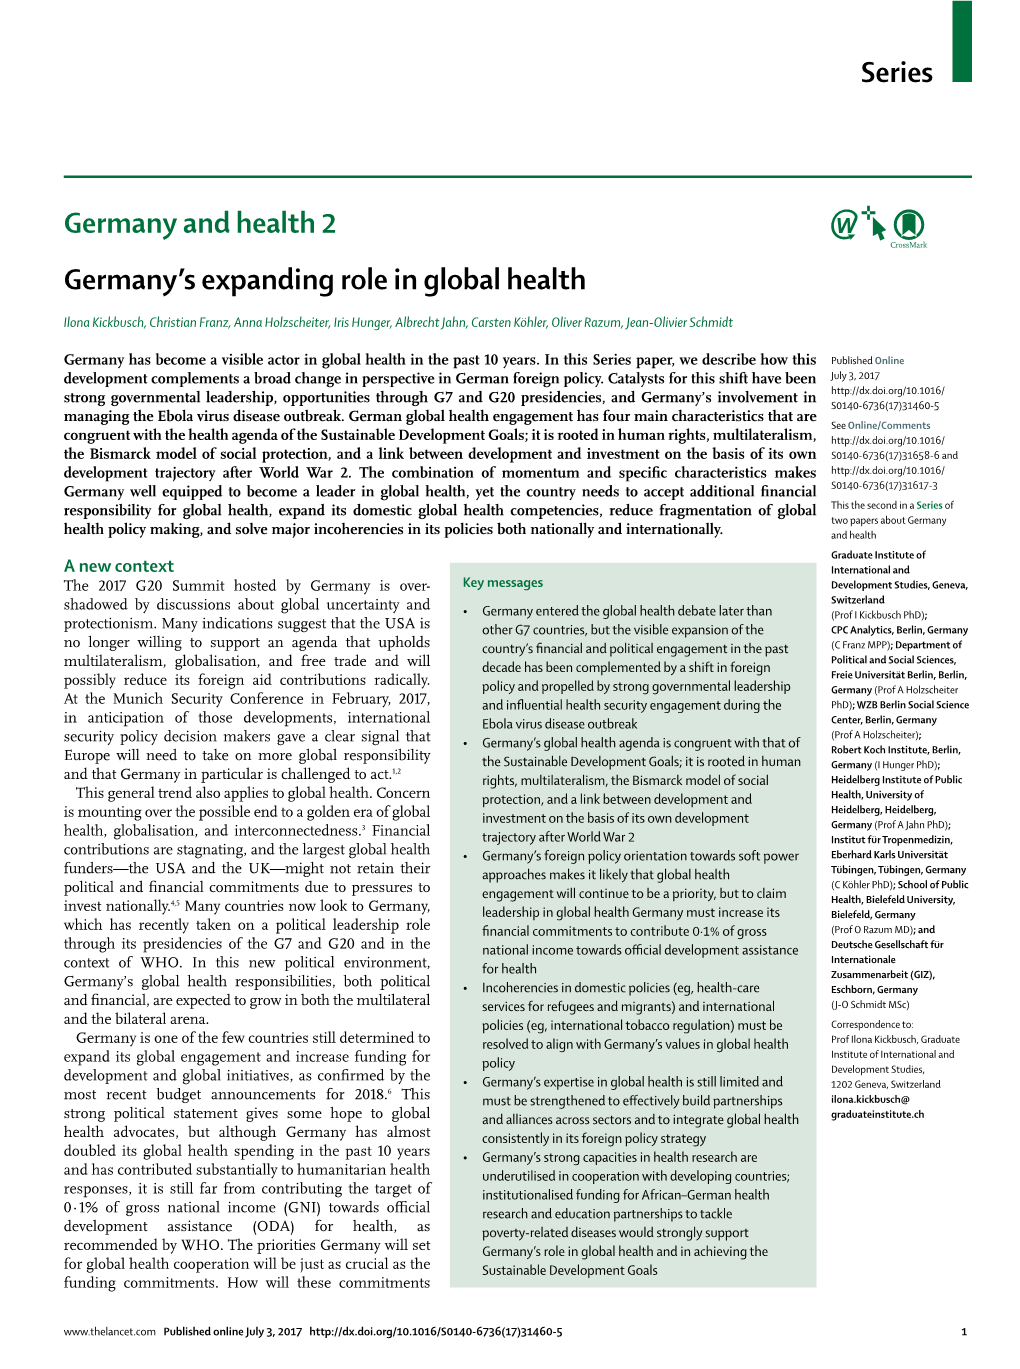 Germany's Expanding Role in Global Health, Www